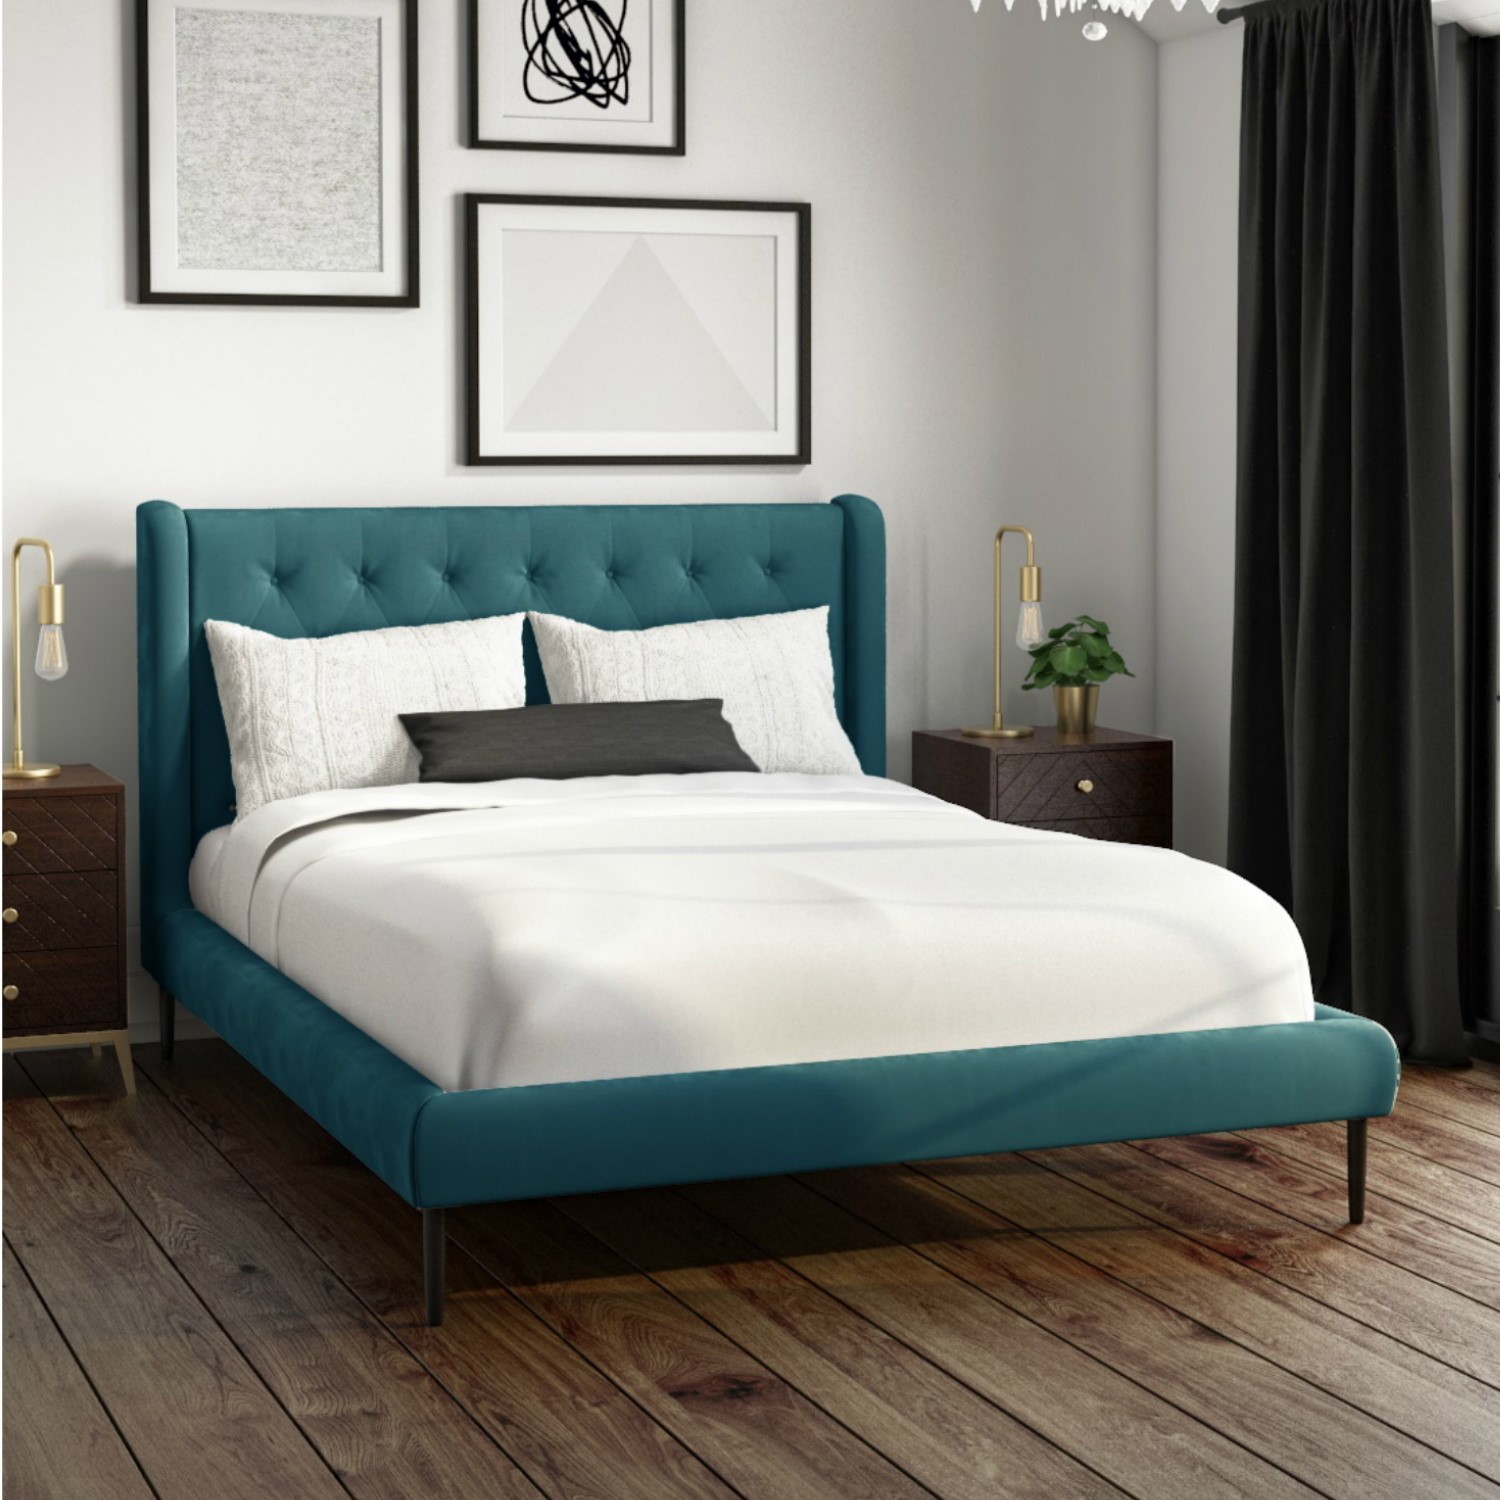 Teal Velvet Double Bed Frame With, What Is The Size Of Double Bed Frame